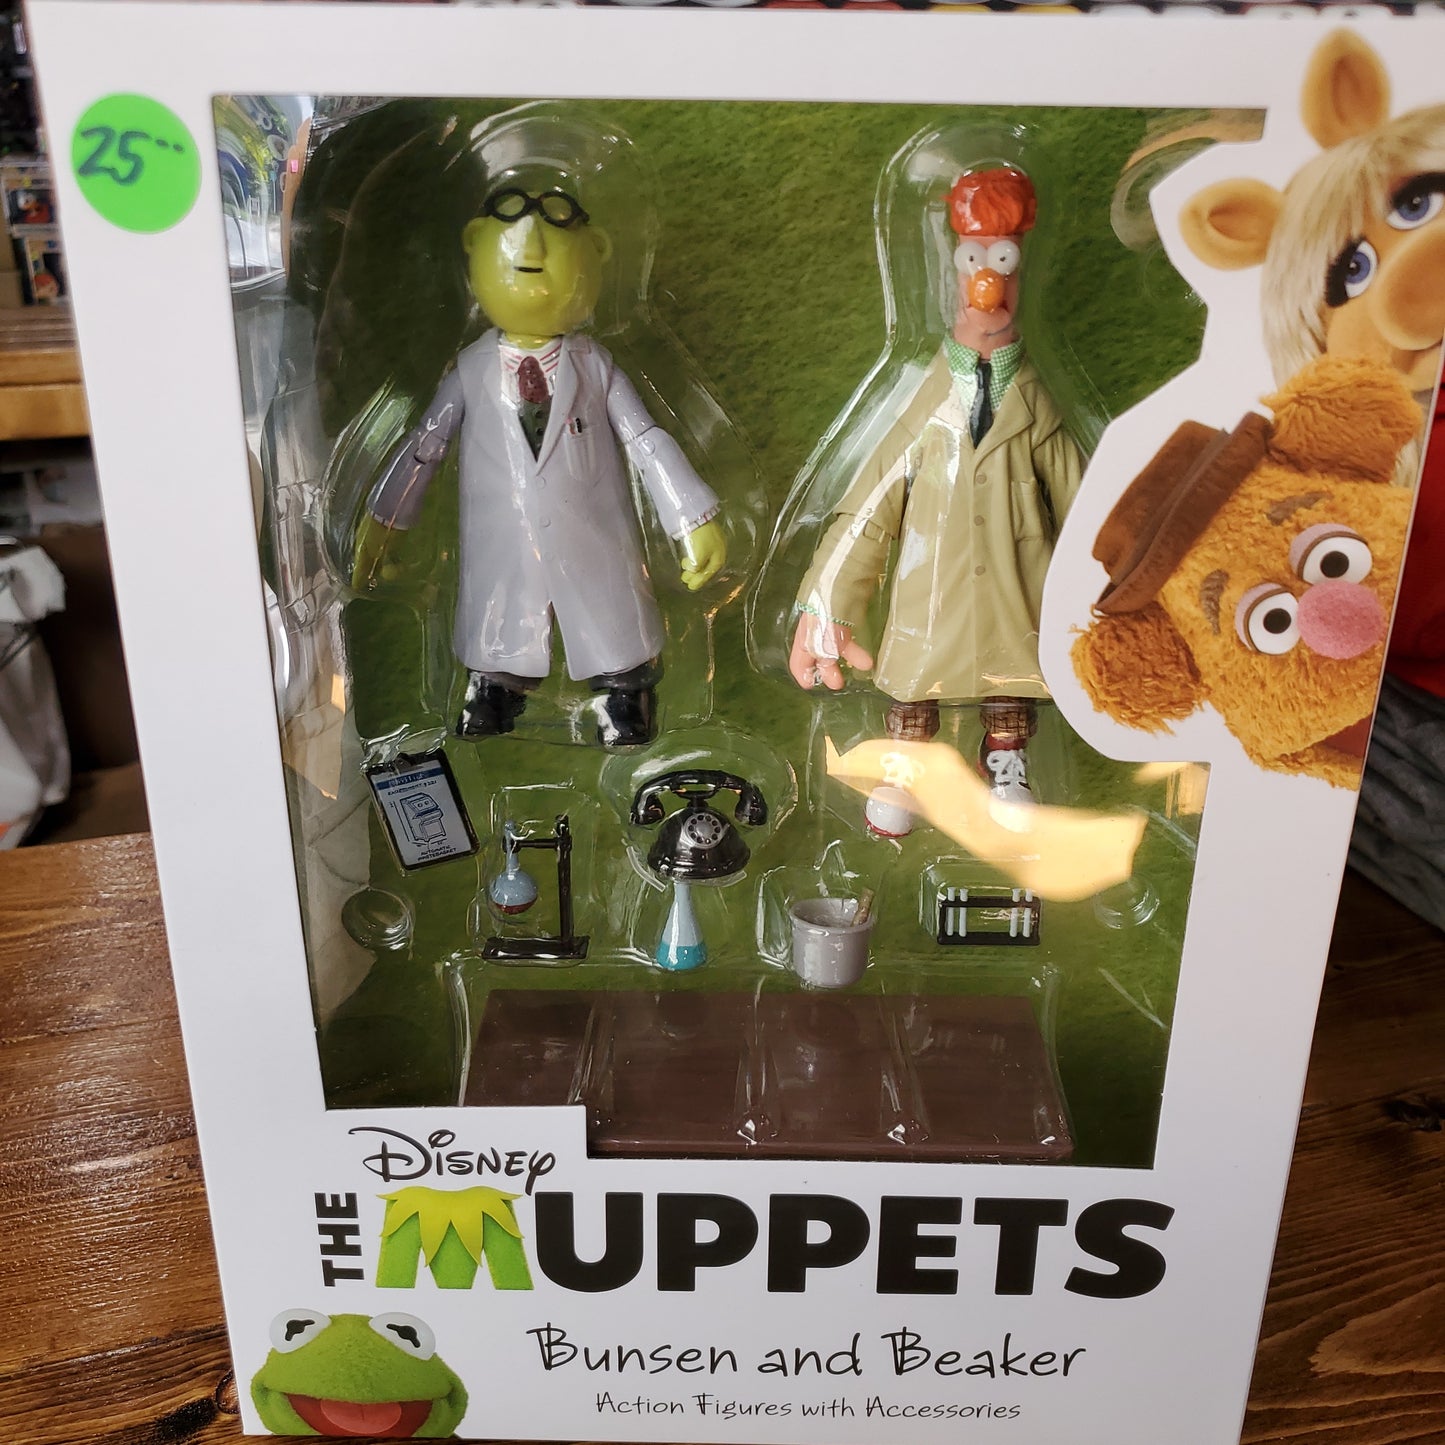 The Muppets Bunsen and Beaker figures